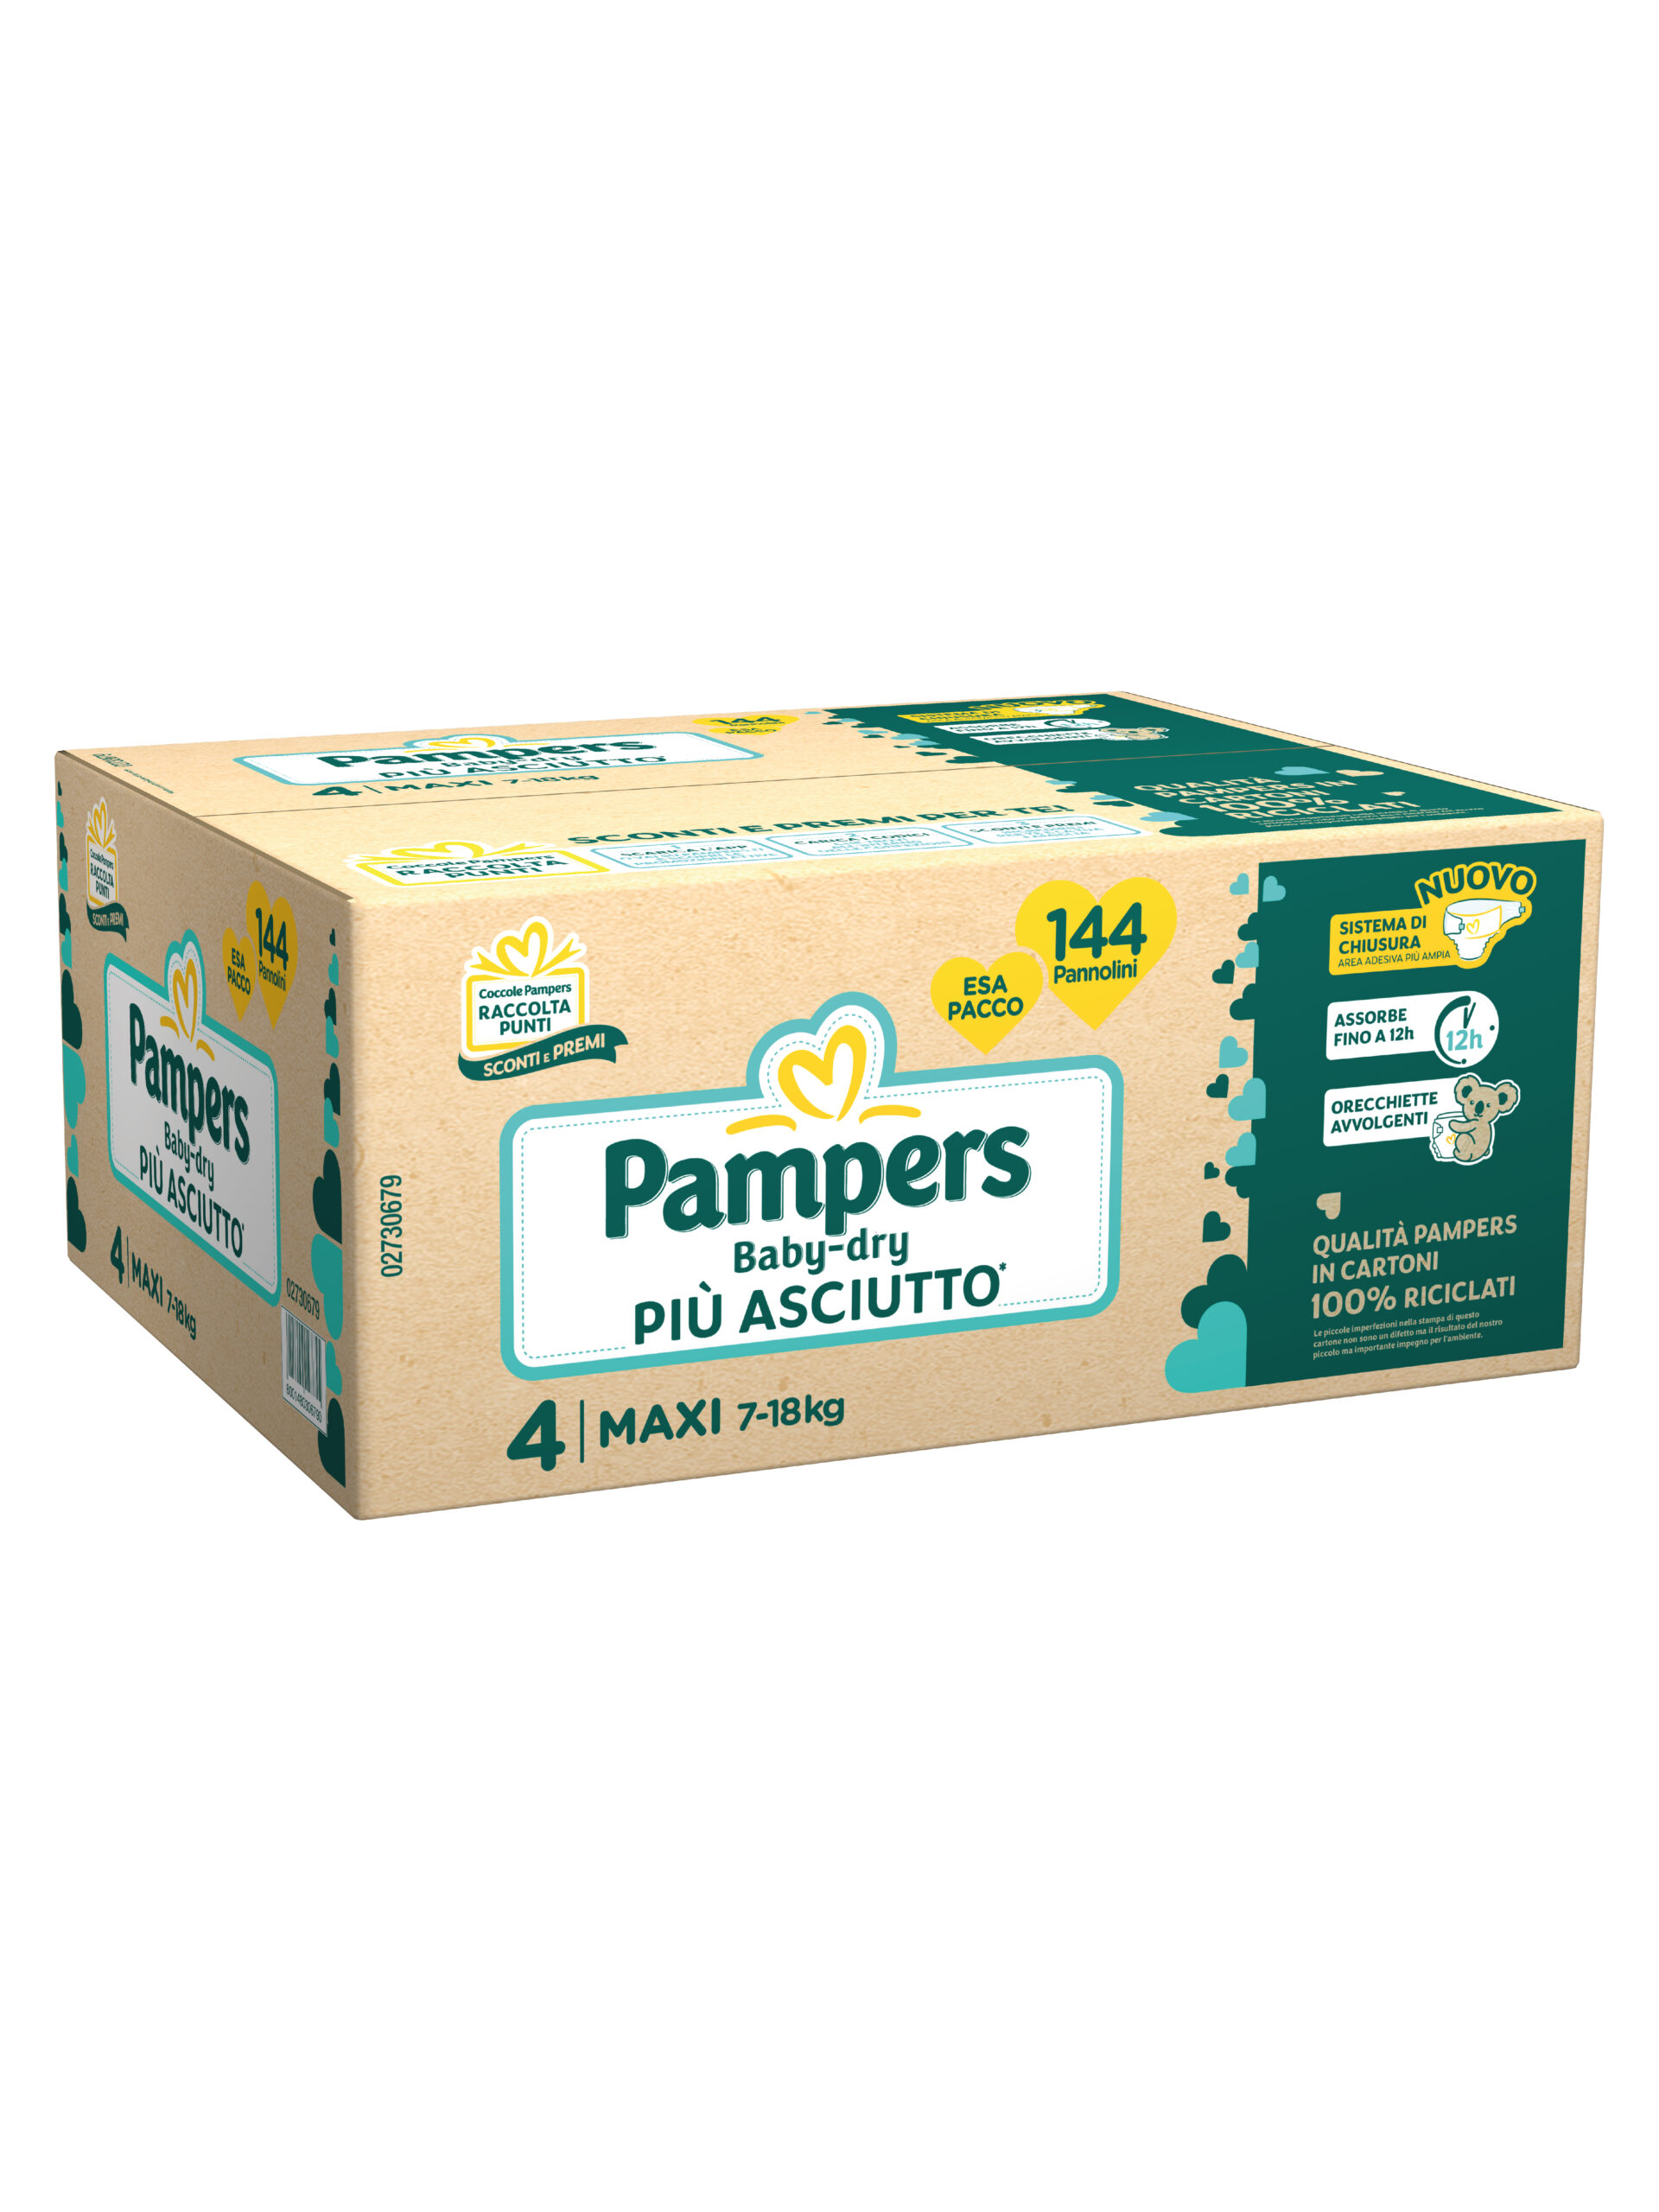 Pampers baby-dry esa maxi 144 pz